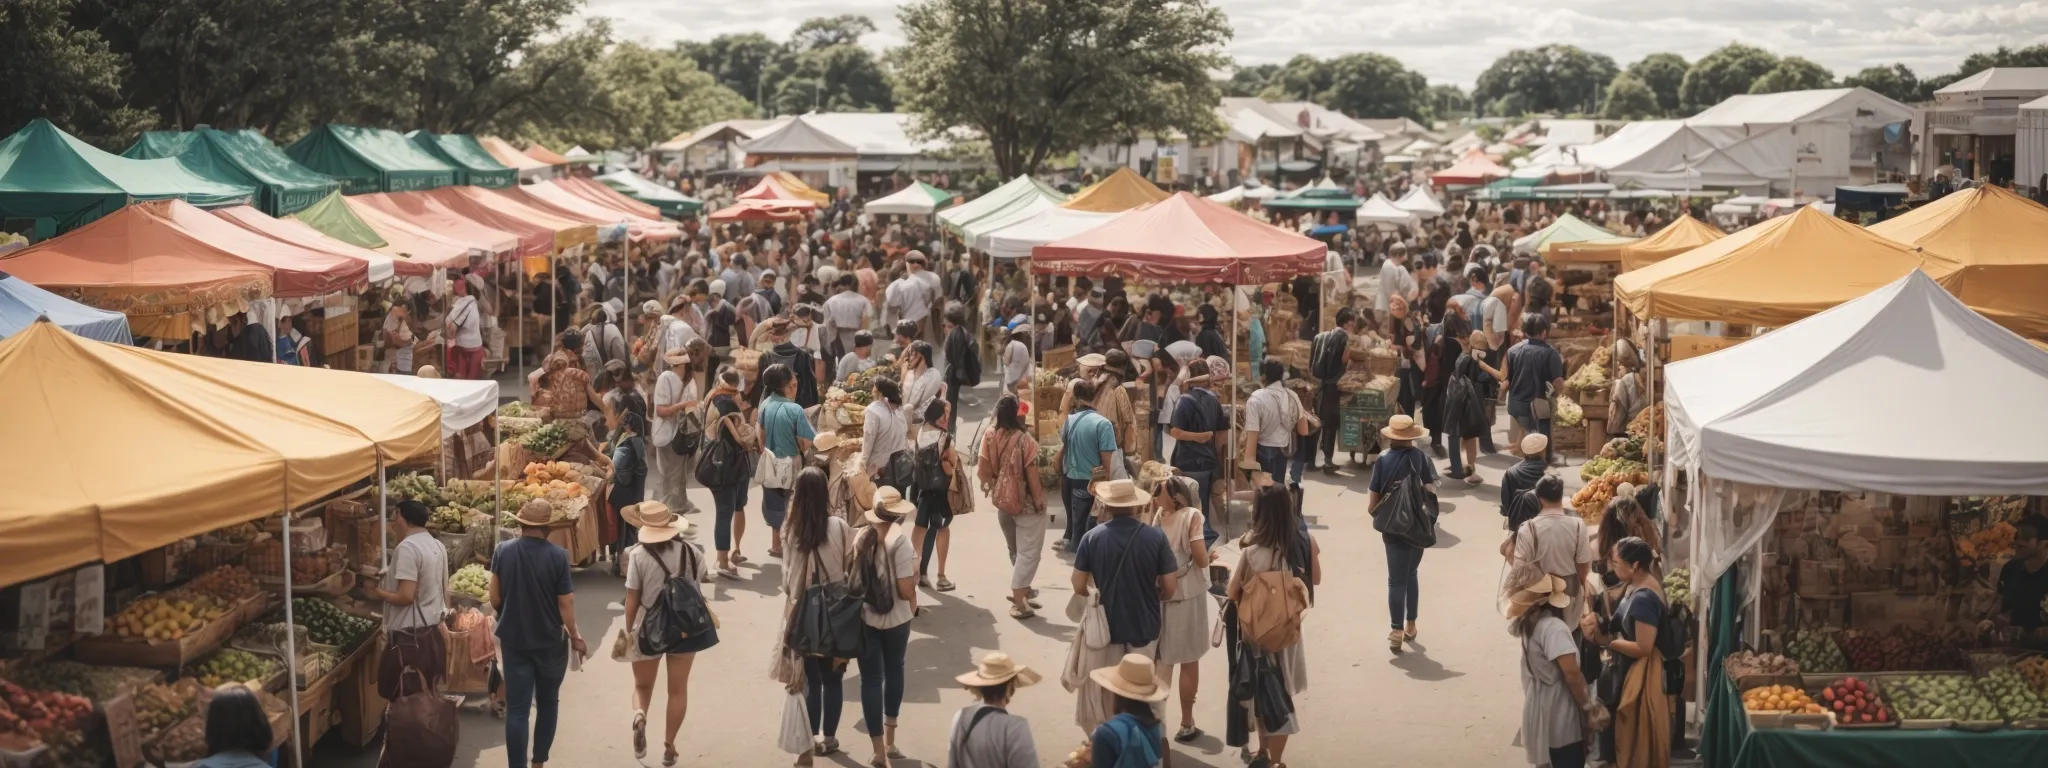 a bustling local farmers' market with vibrant booths attracting a community of engaged social media users.